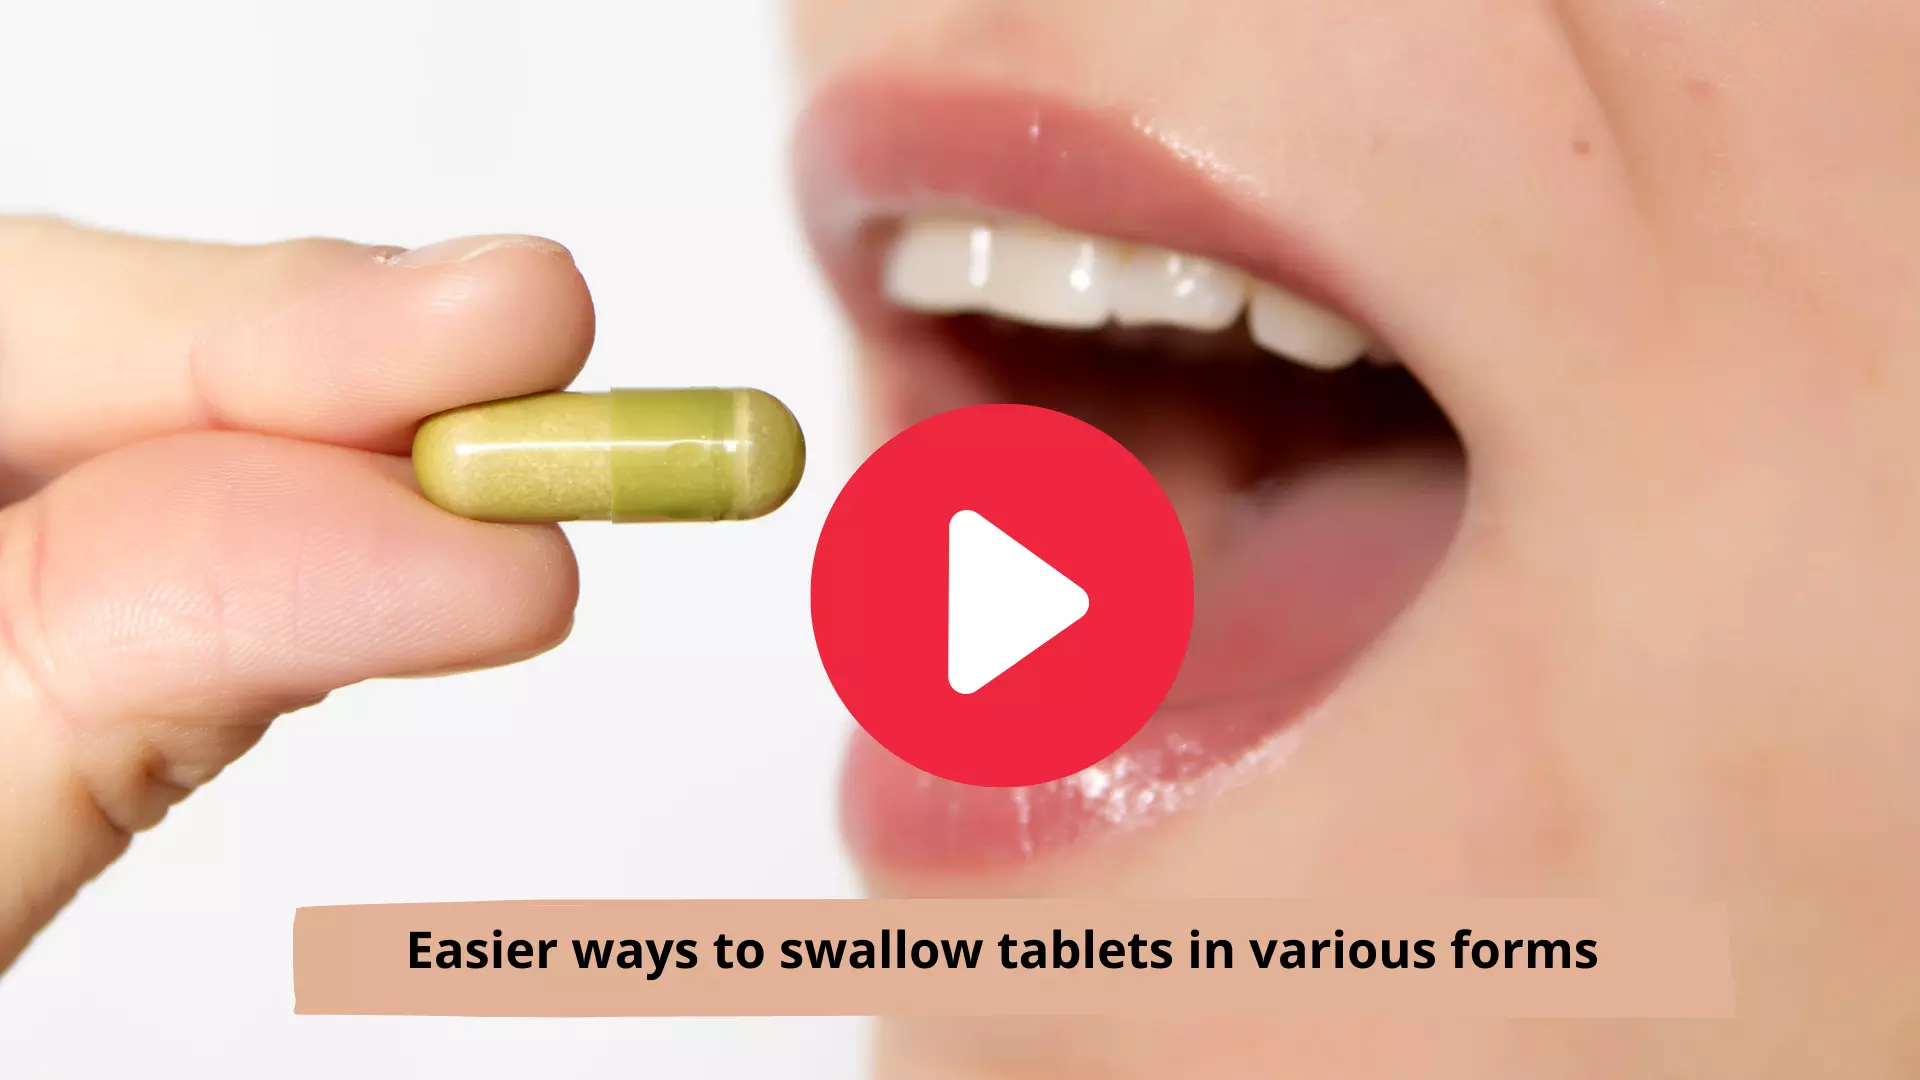 Easier ways to swallow tablets in various forms